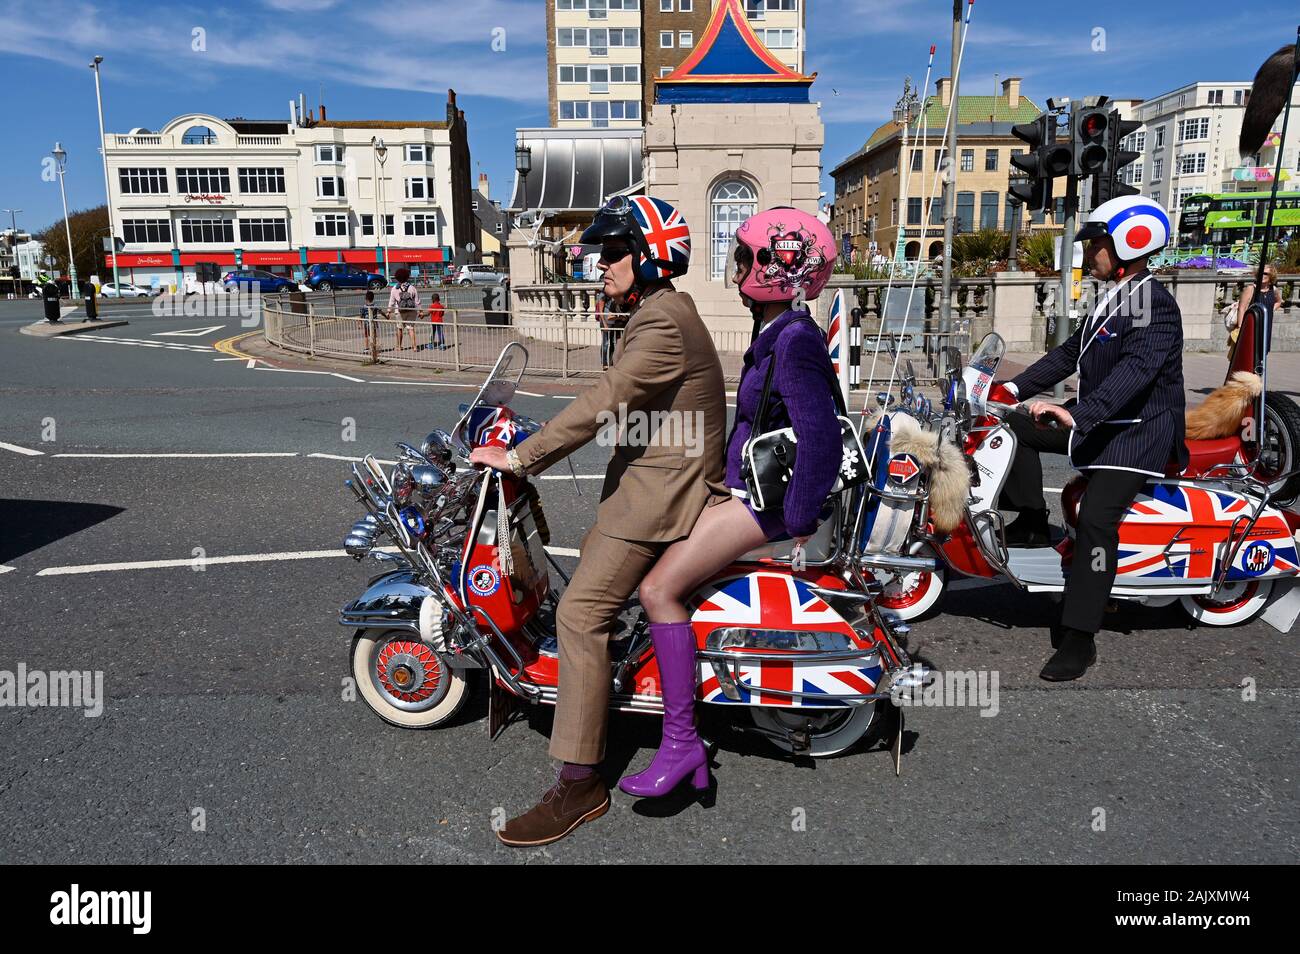 Scooter riders Mod weekend in Brighton England Stock Photo